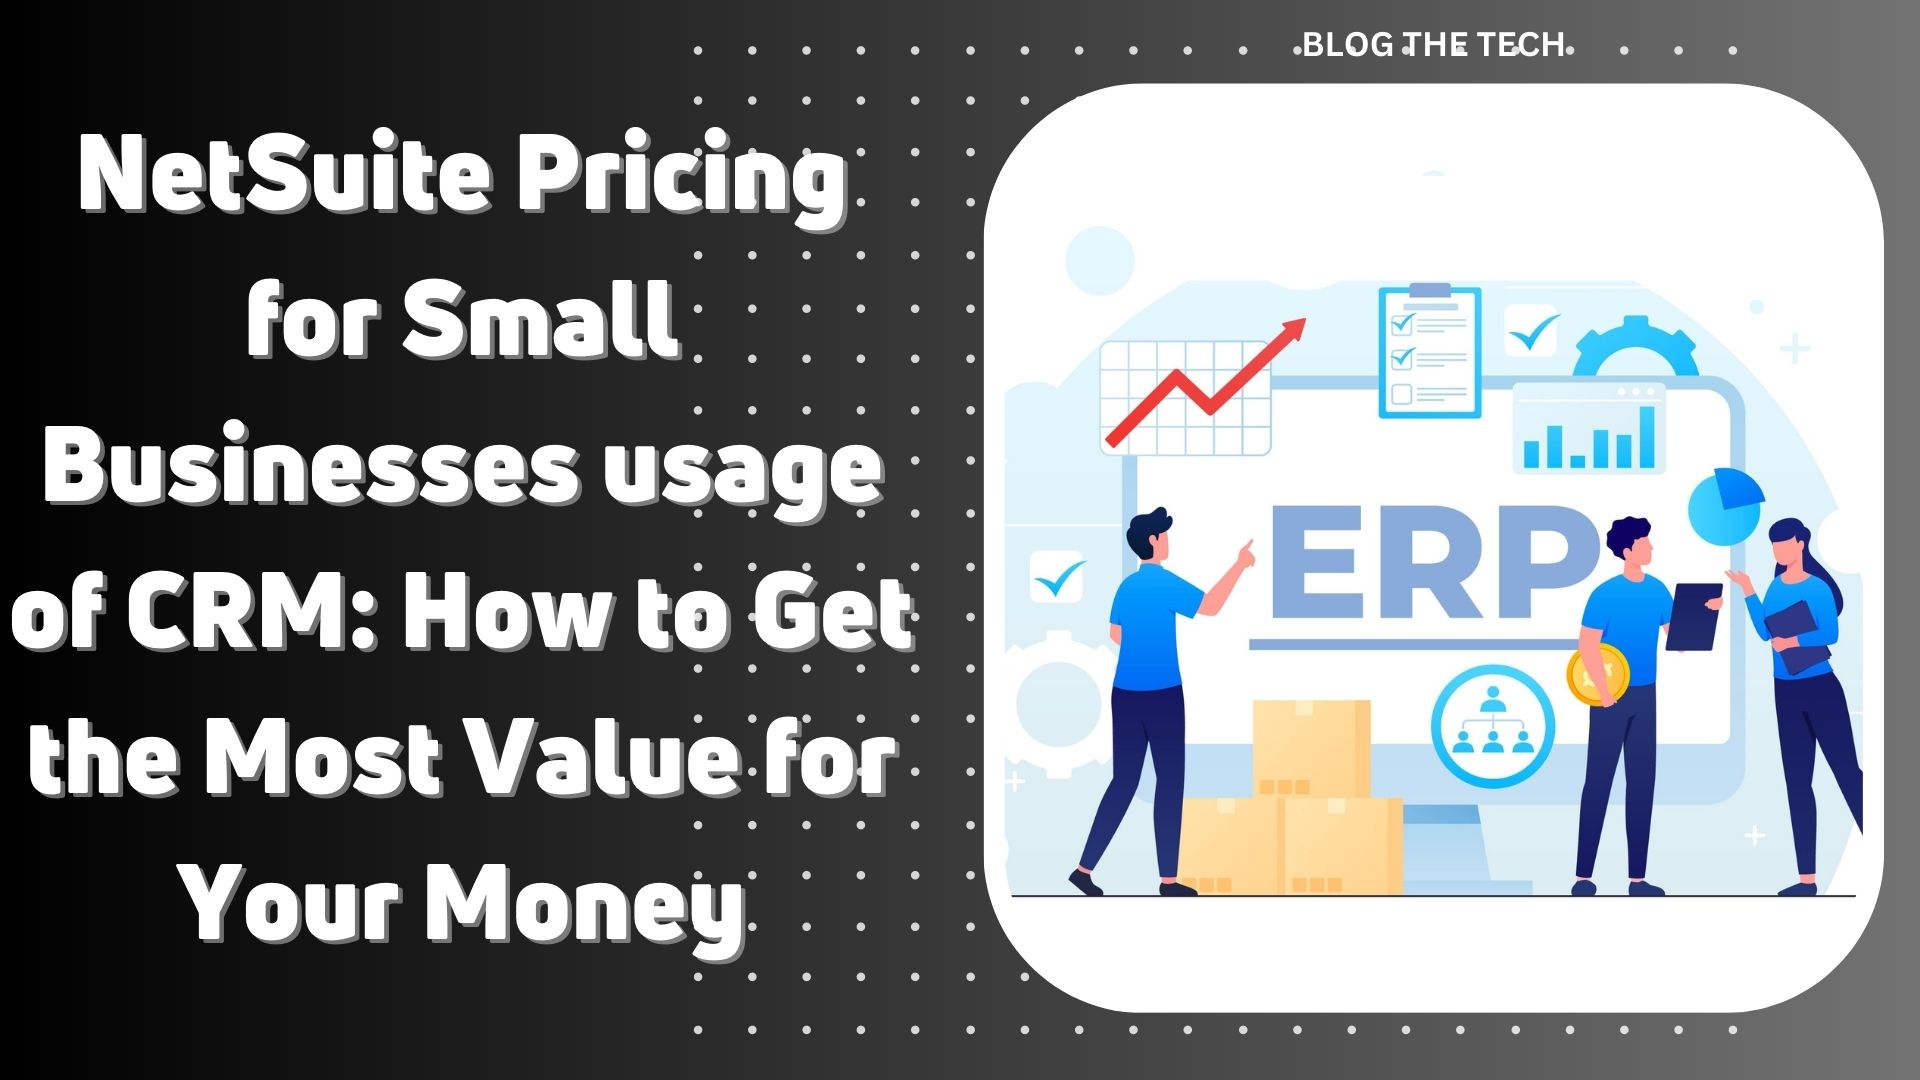 NetSuite Pricing For Small Businesses Usage Of CRM How To Get The Most